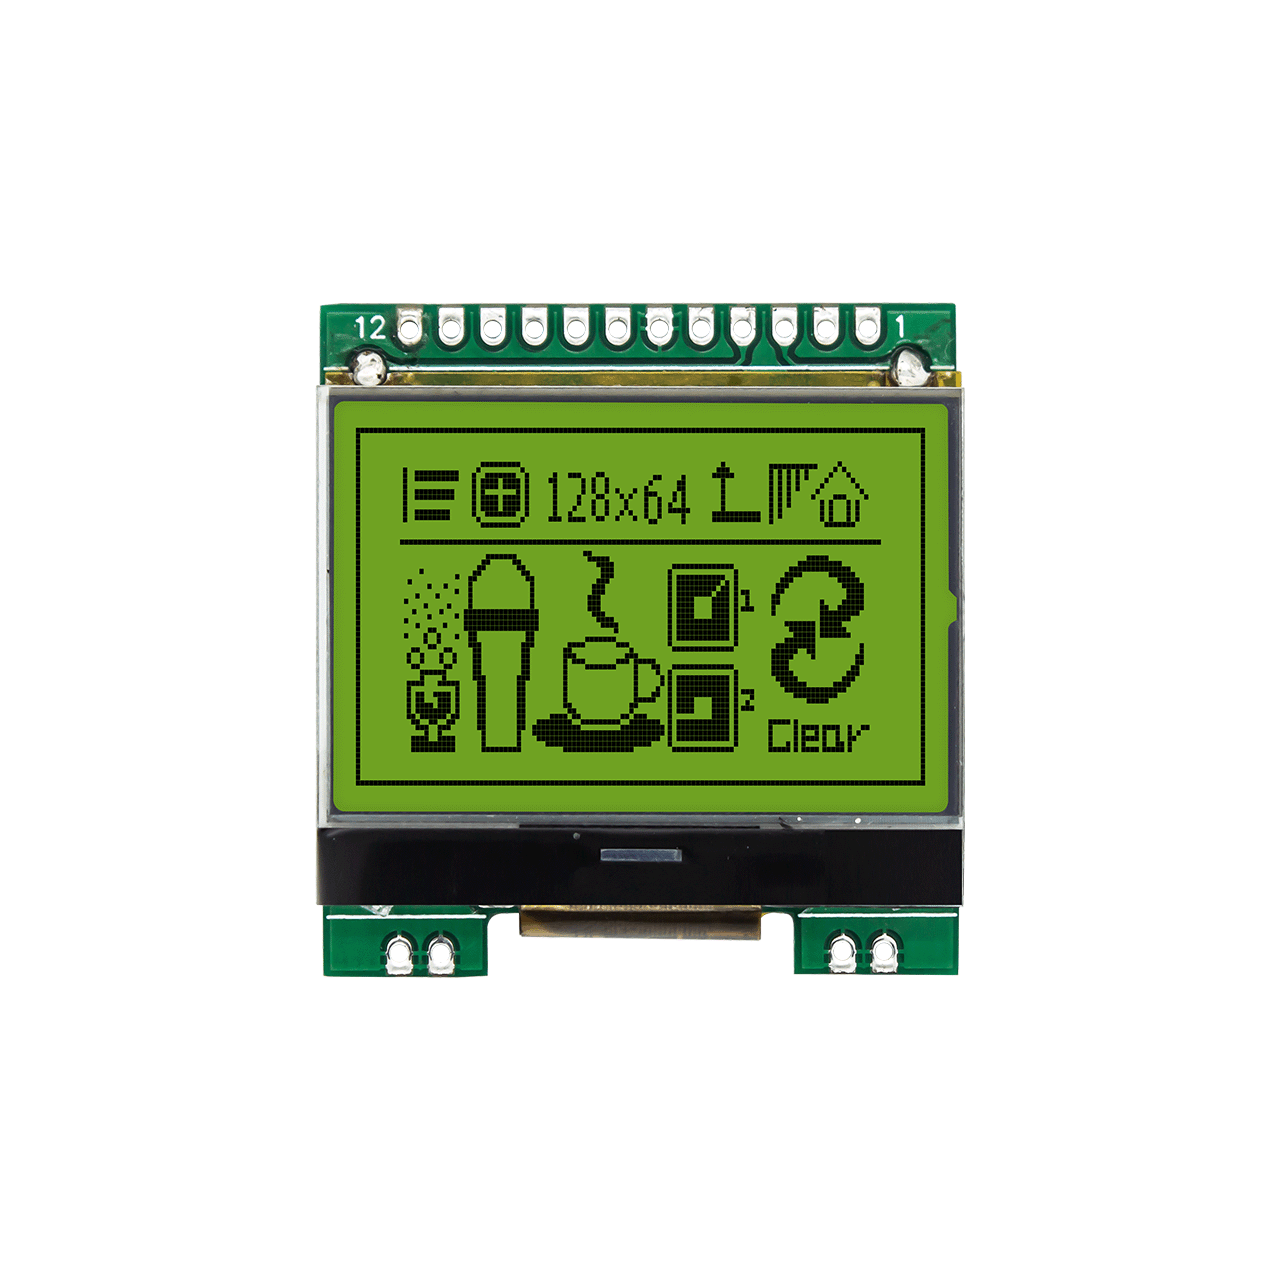 1.7-inch 128X64 graphic LCD module | STN front display + yellow-green backlight display | Ultra-low temperature -40℃